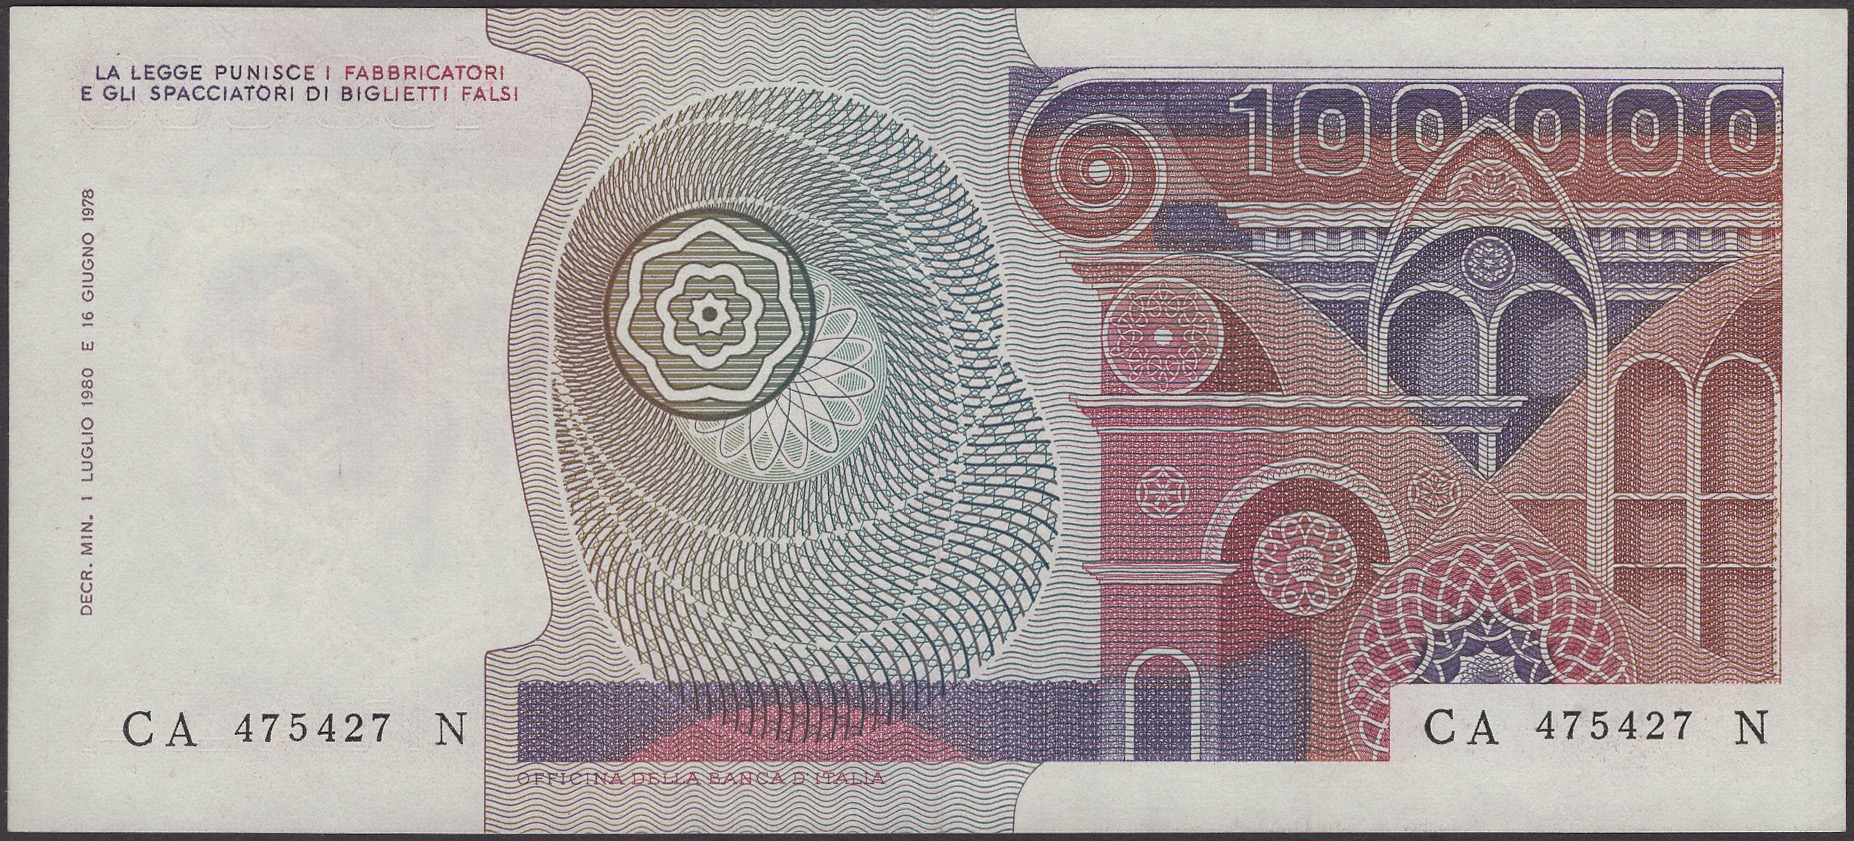 Banca d'Italia, 100000 Lire, 1980, serial number CA475427N, central fold, thus about... - Image 2 of 2